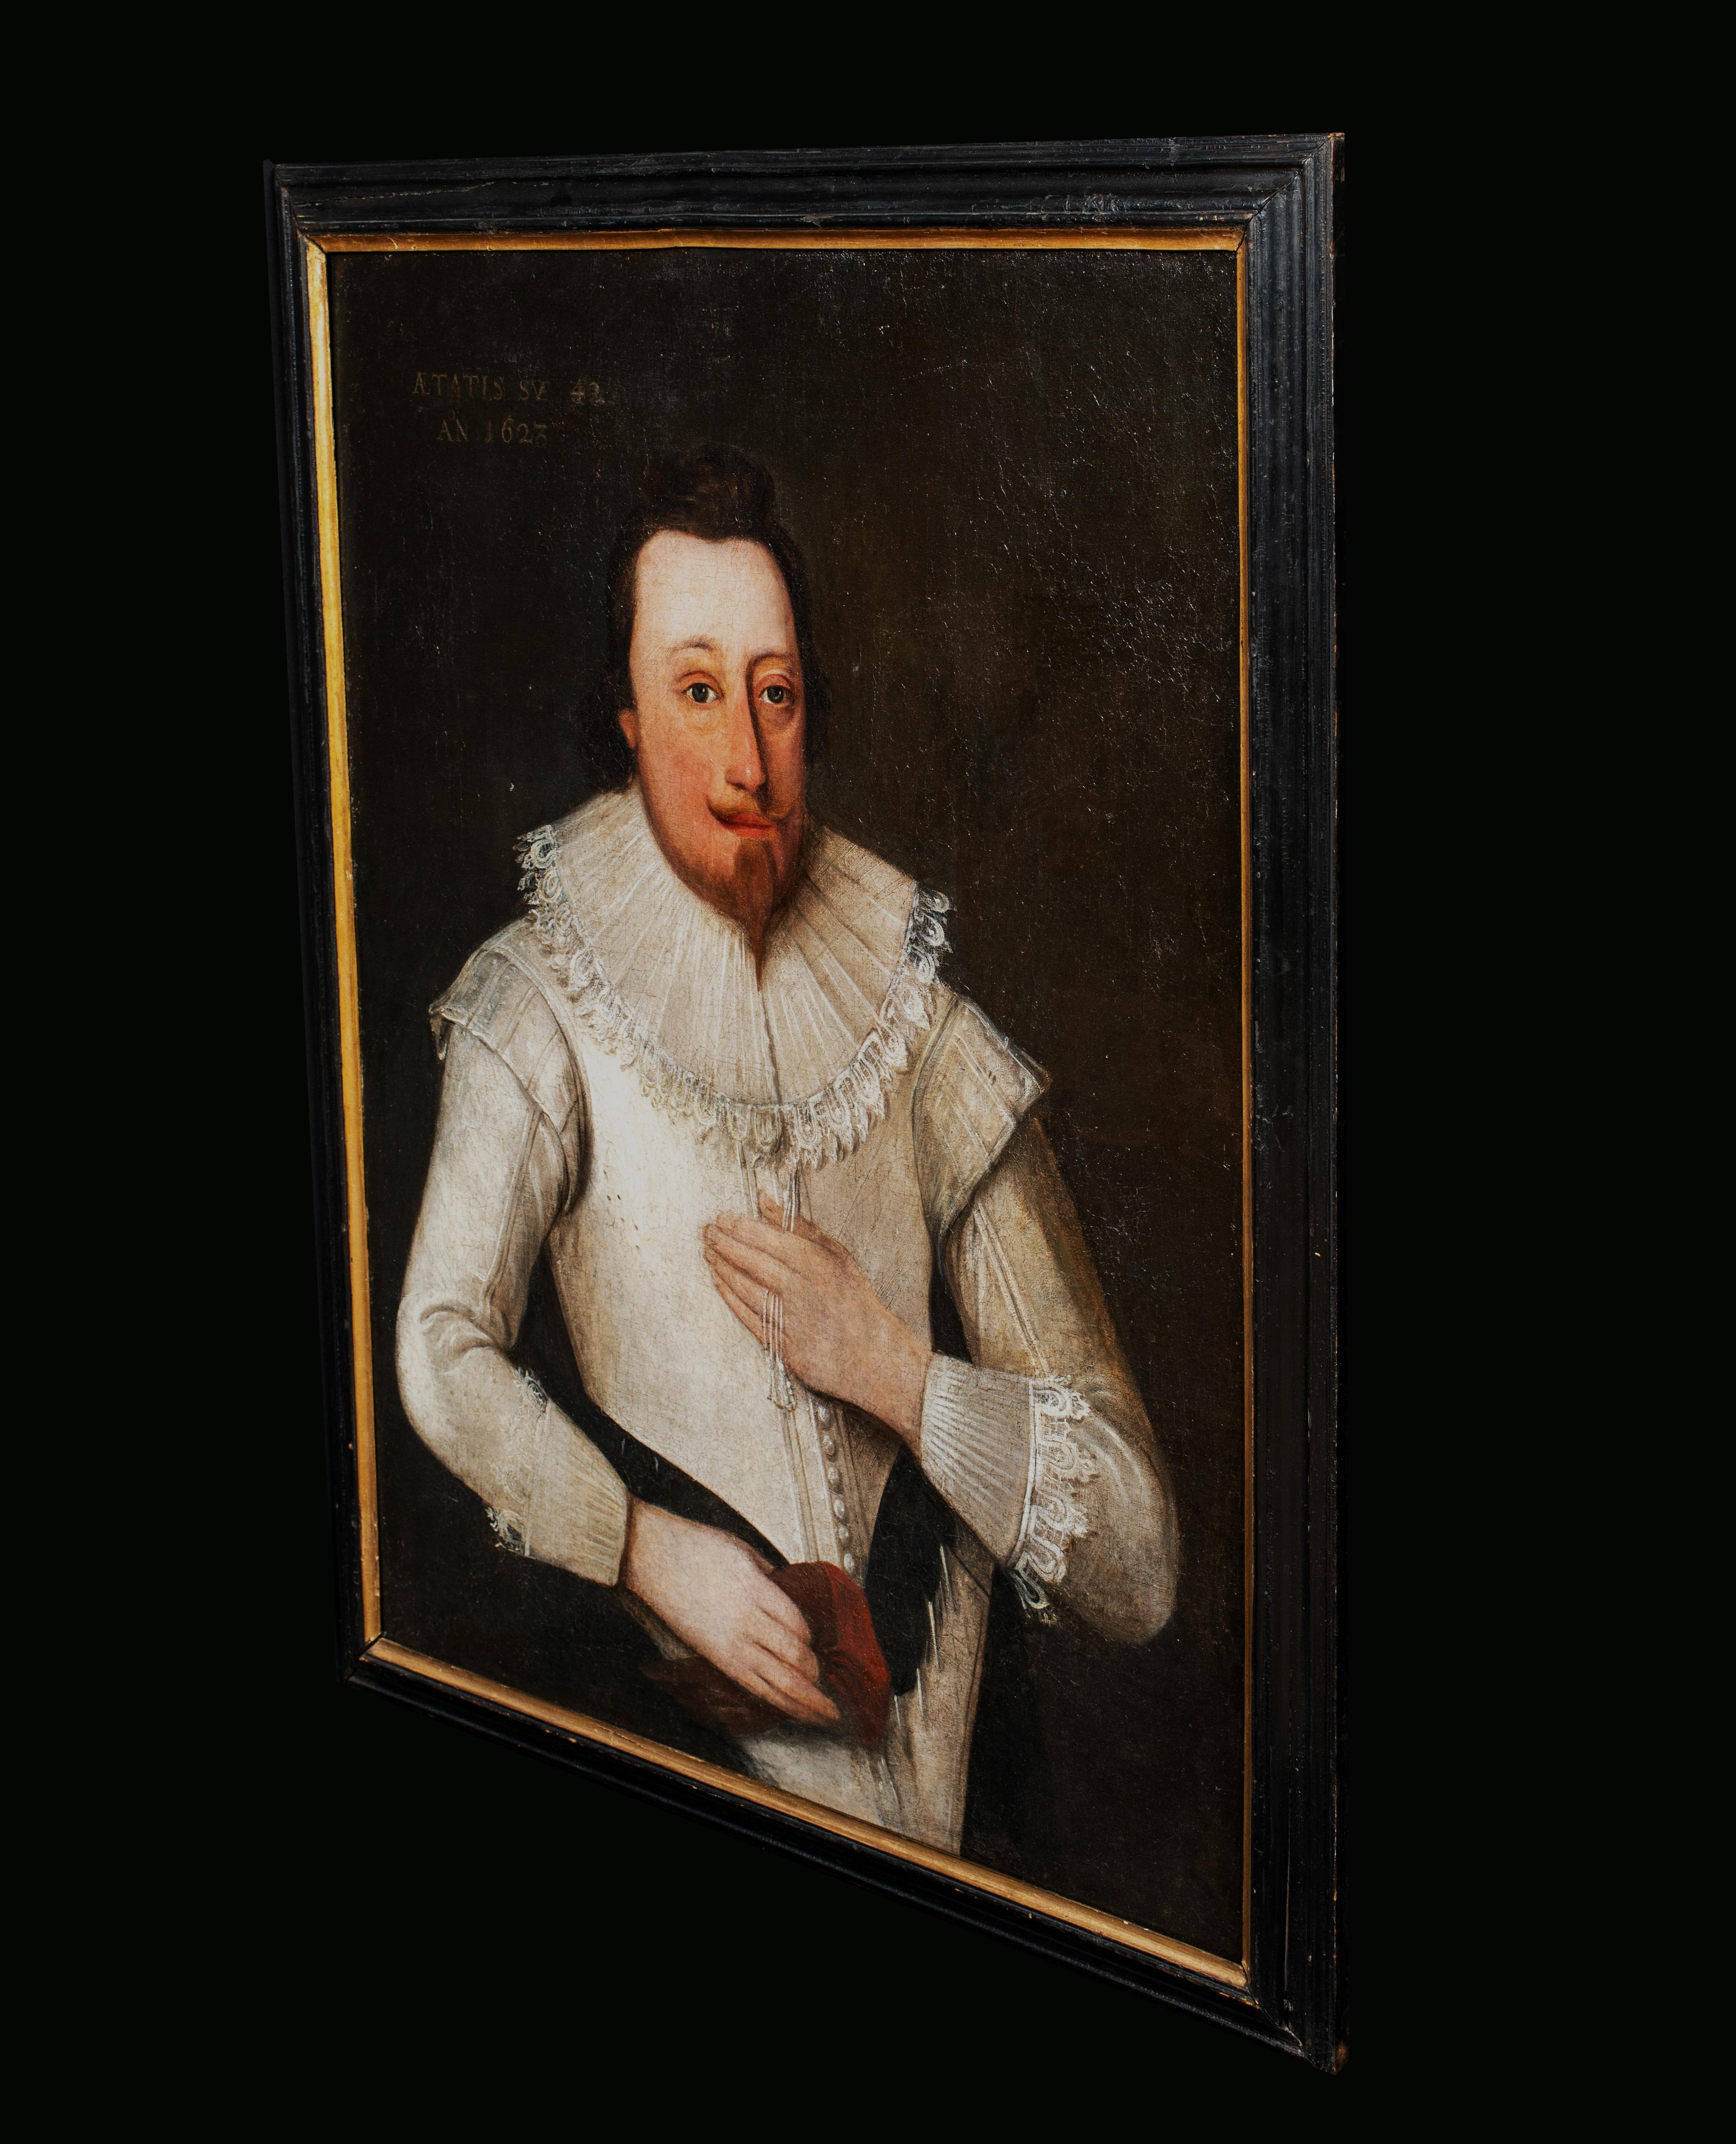 Portrait Of A Elizabethan Gentleman 

Traditionally Identified As Edmund Spenser (1552-1599)

Large Elizabethan School portrait of gentleman traditionally identified as poet Edmund Spenser, oil on canvas. Excellent quality and condition half length